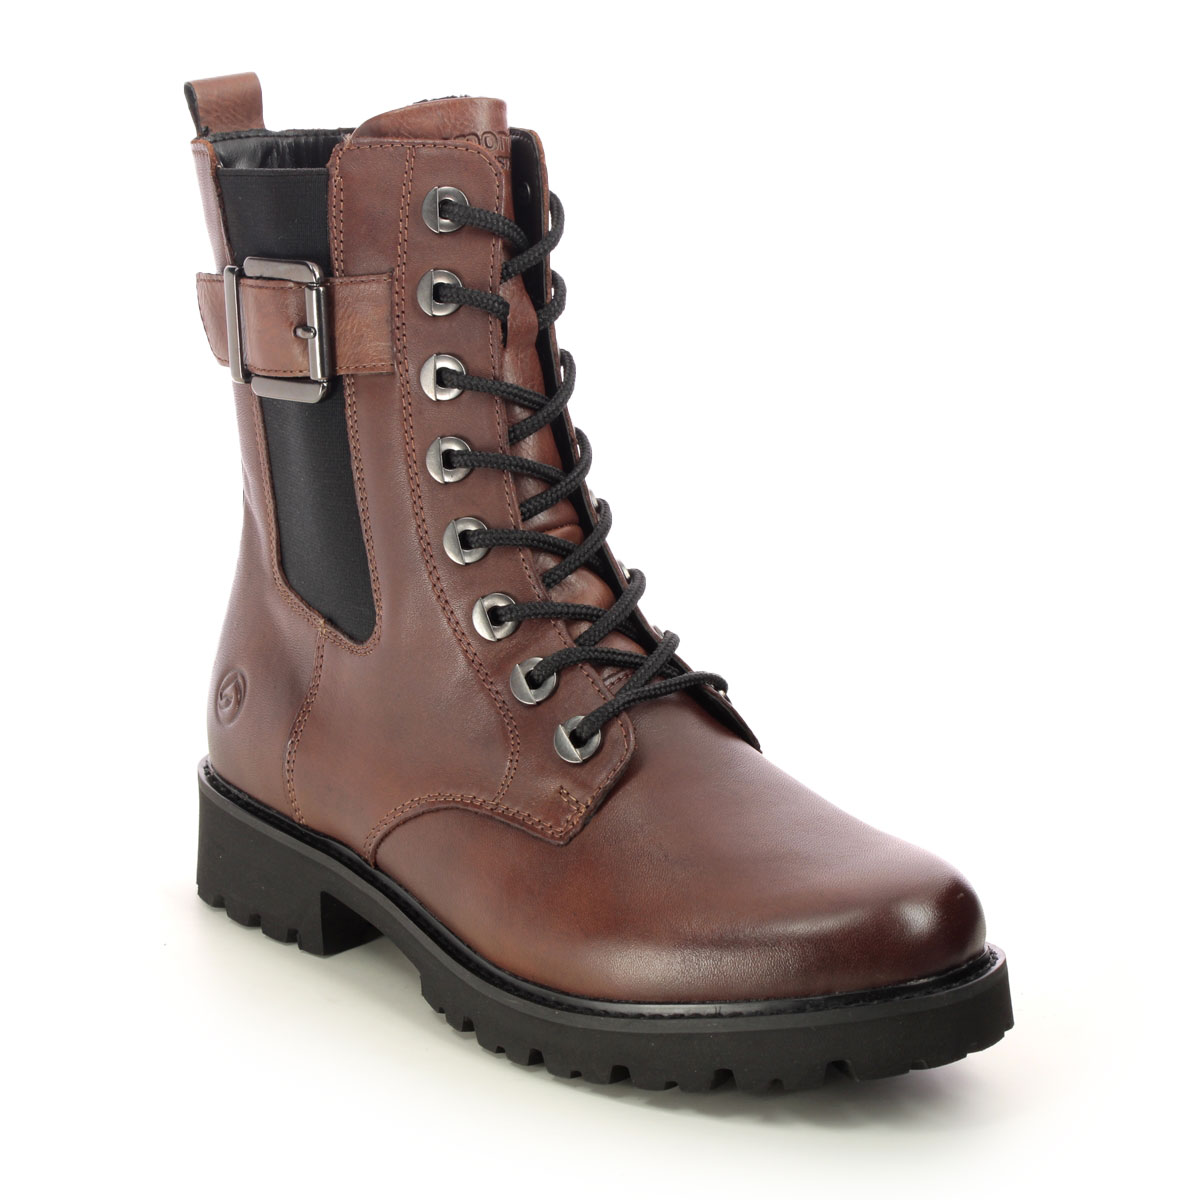 Remonte Doclachel Elle Brown Leather Womens Biker Boots D8668-22 In Size 37 In Plain Brown Leather